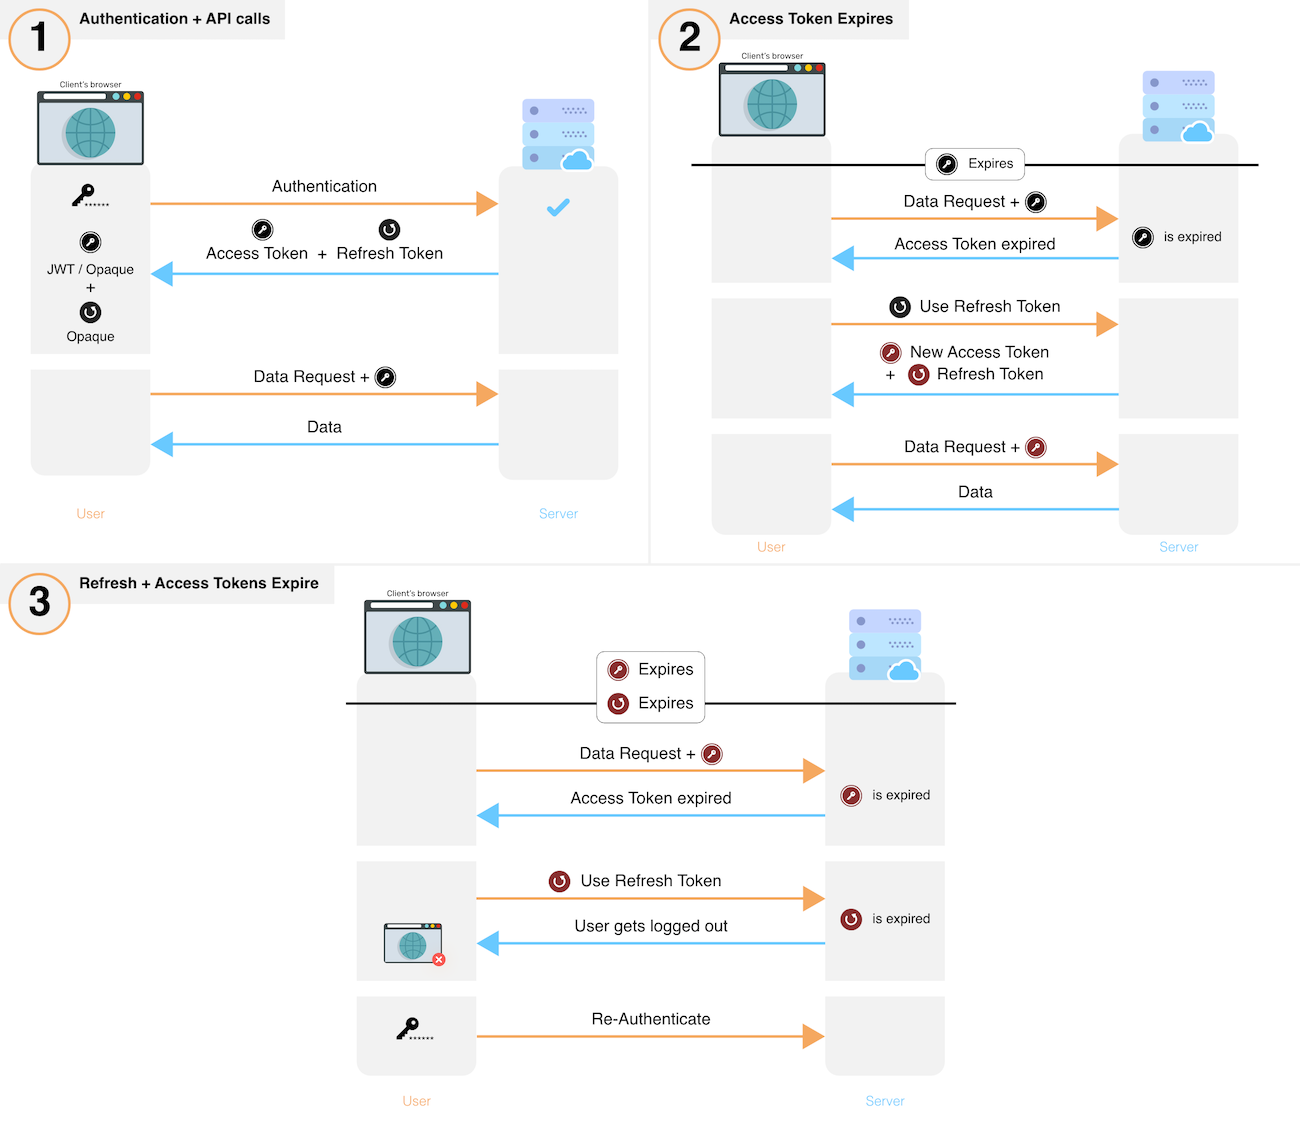 Flowcharts showing an overview of session flow